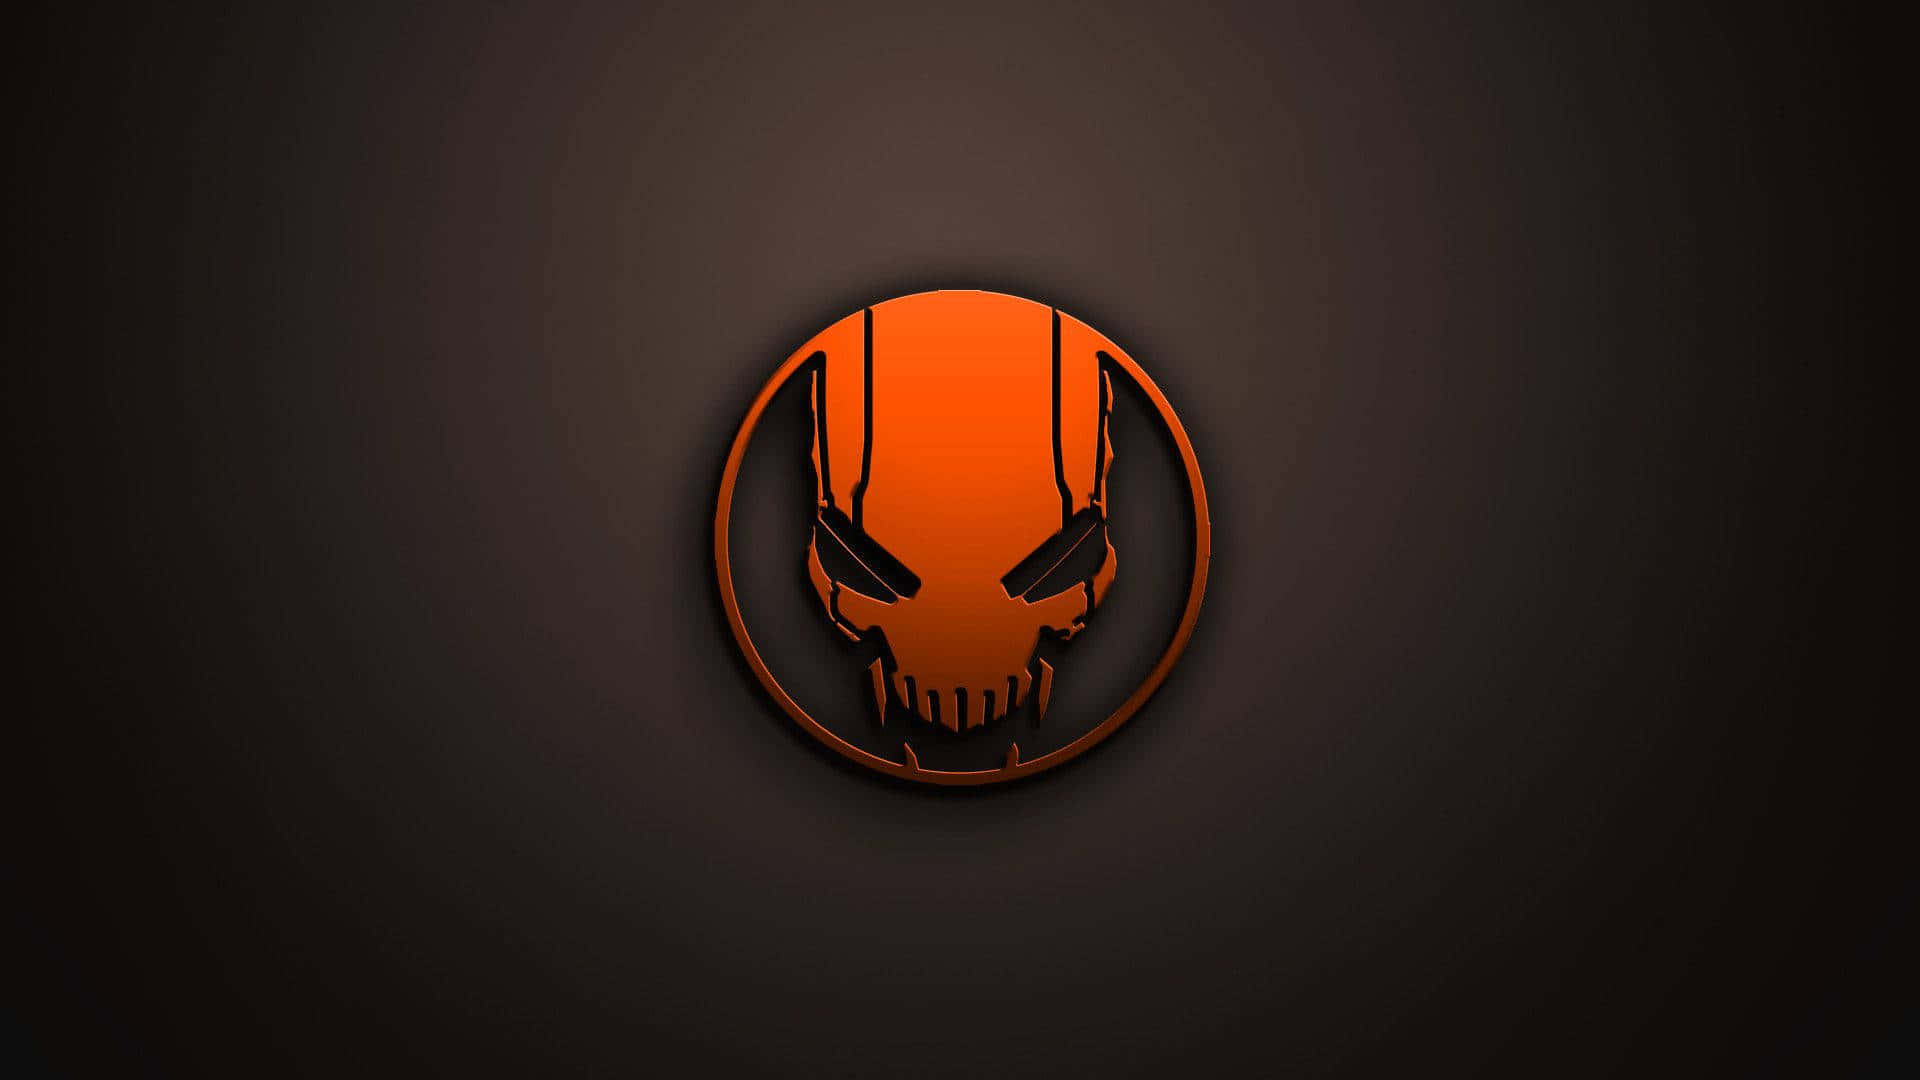 Blacklight Gaming Profile pictures